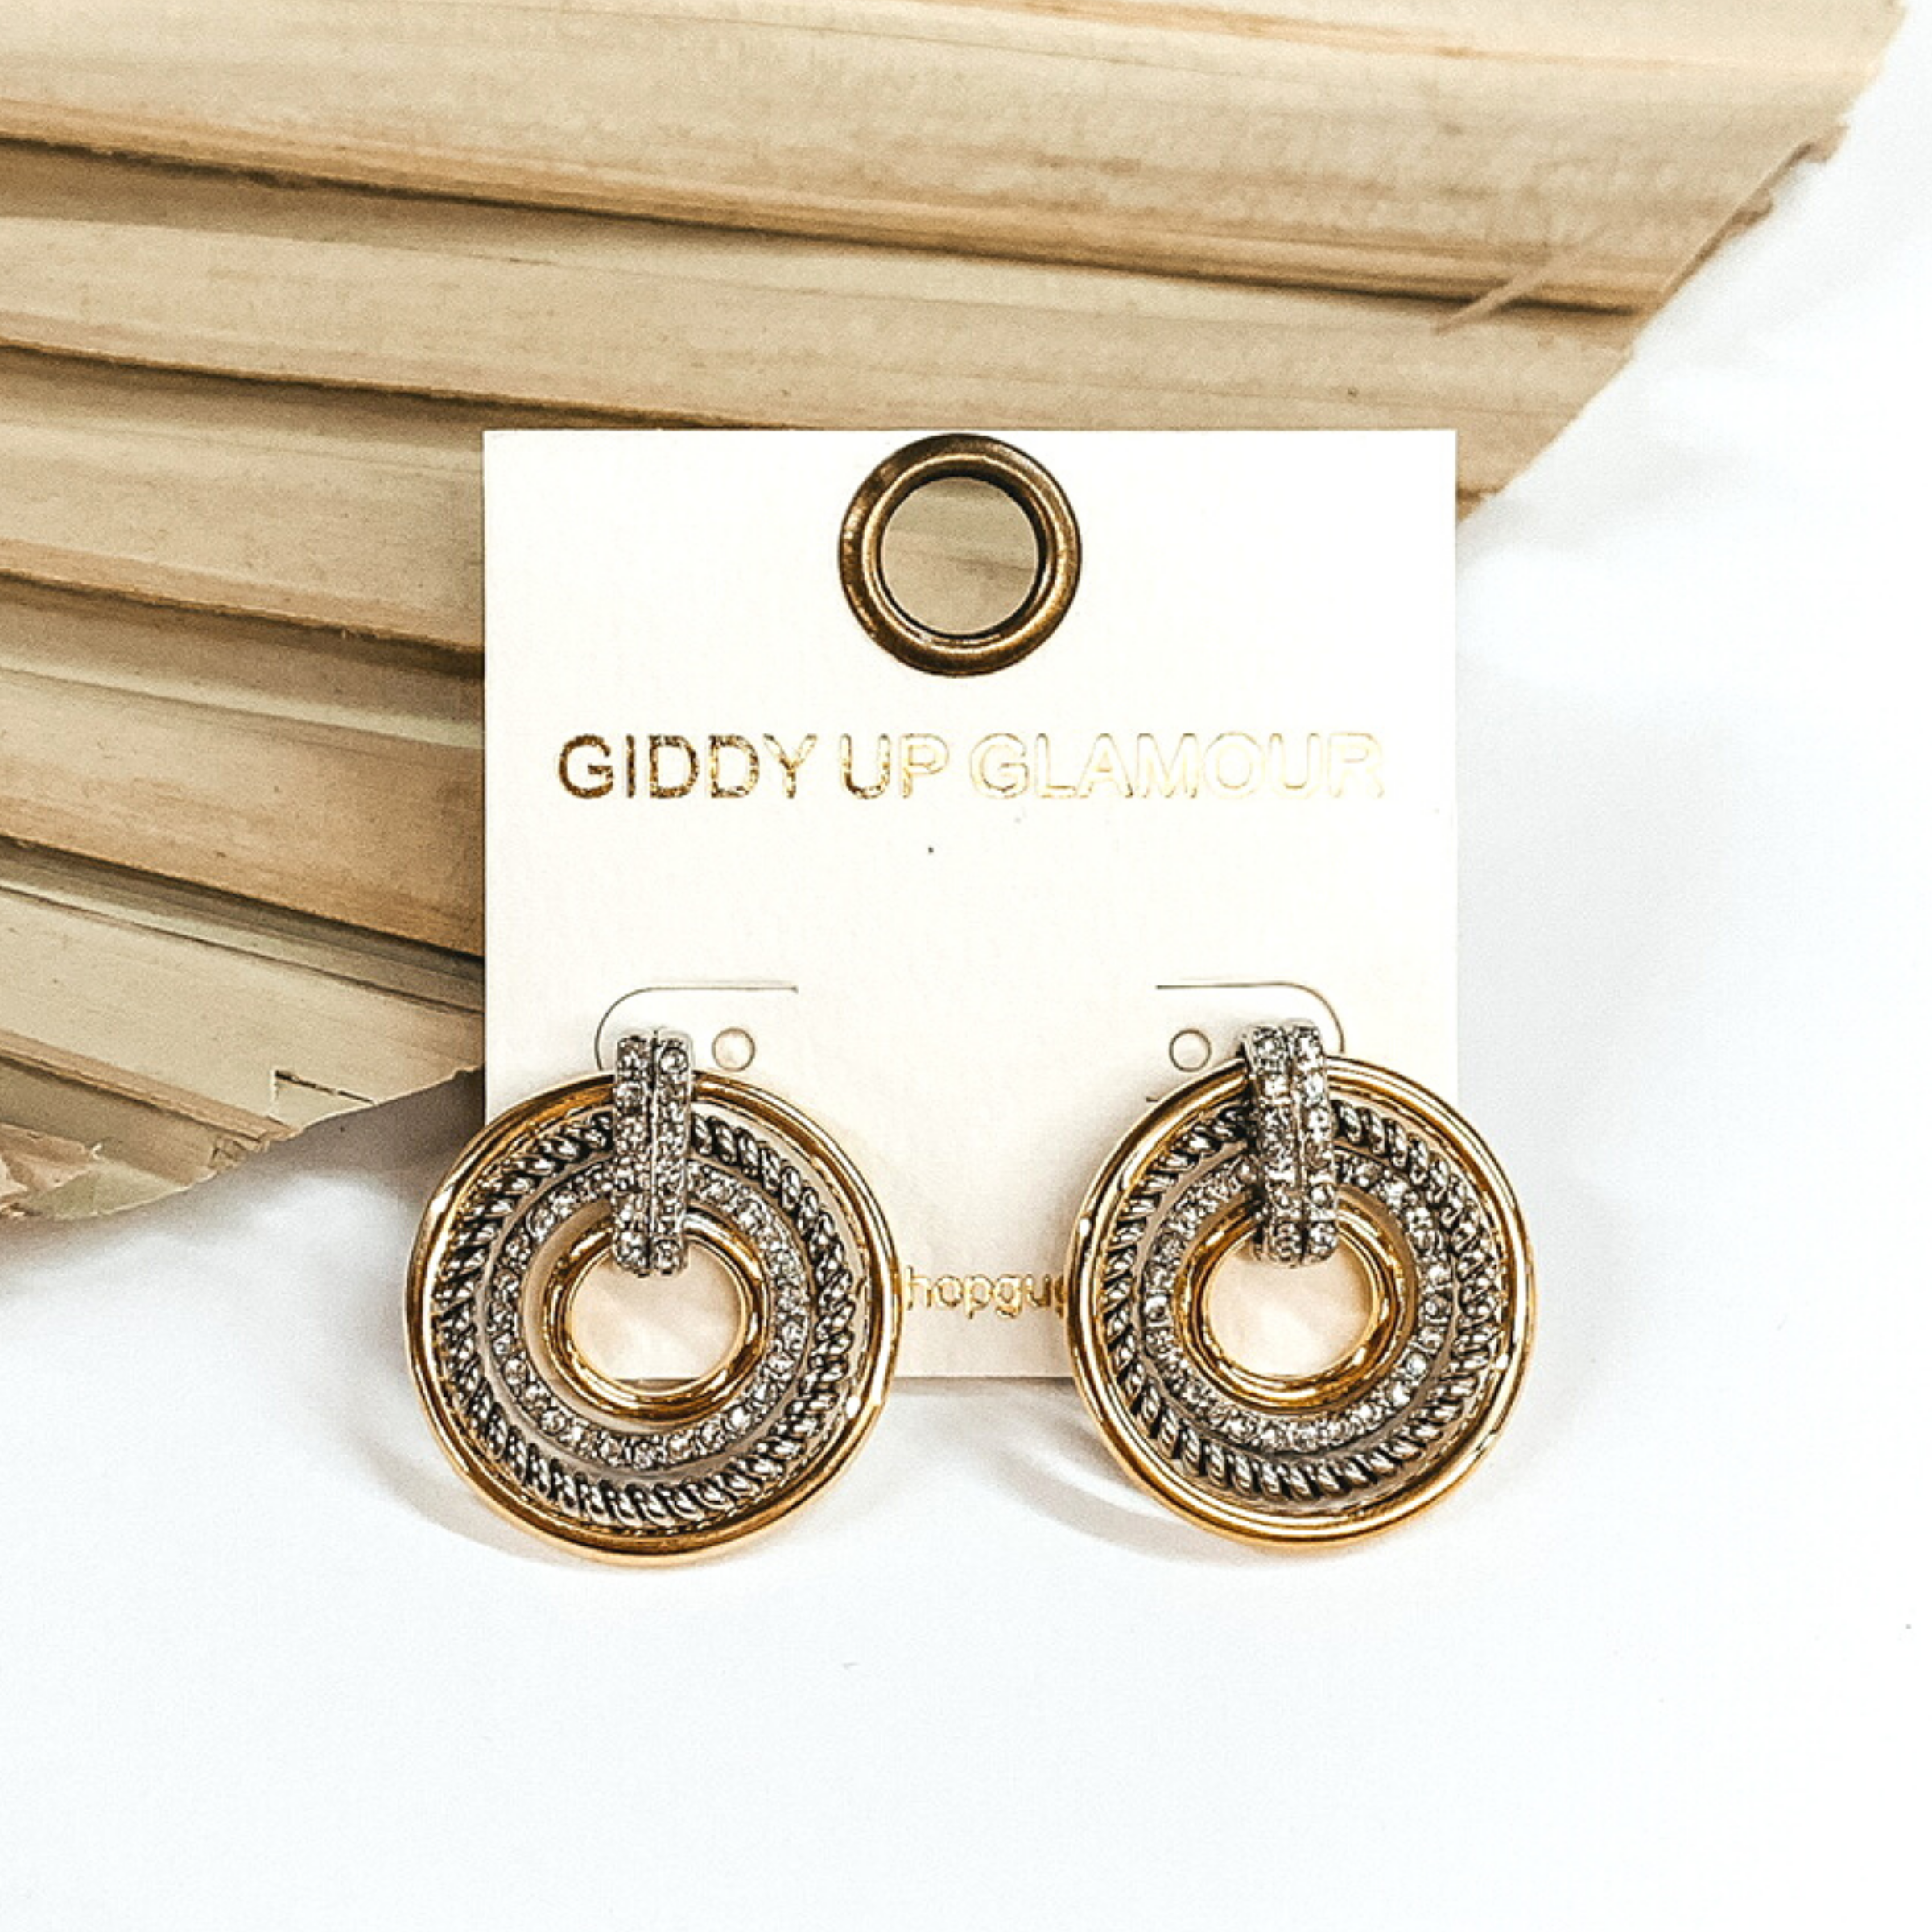 These earrings include gold rings, a silver rope ring, and a clear crystal ring connected together with a clear crystal connecter. These earrings are pictured in front of a dried sage green palm leaf on a white background. 